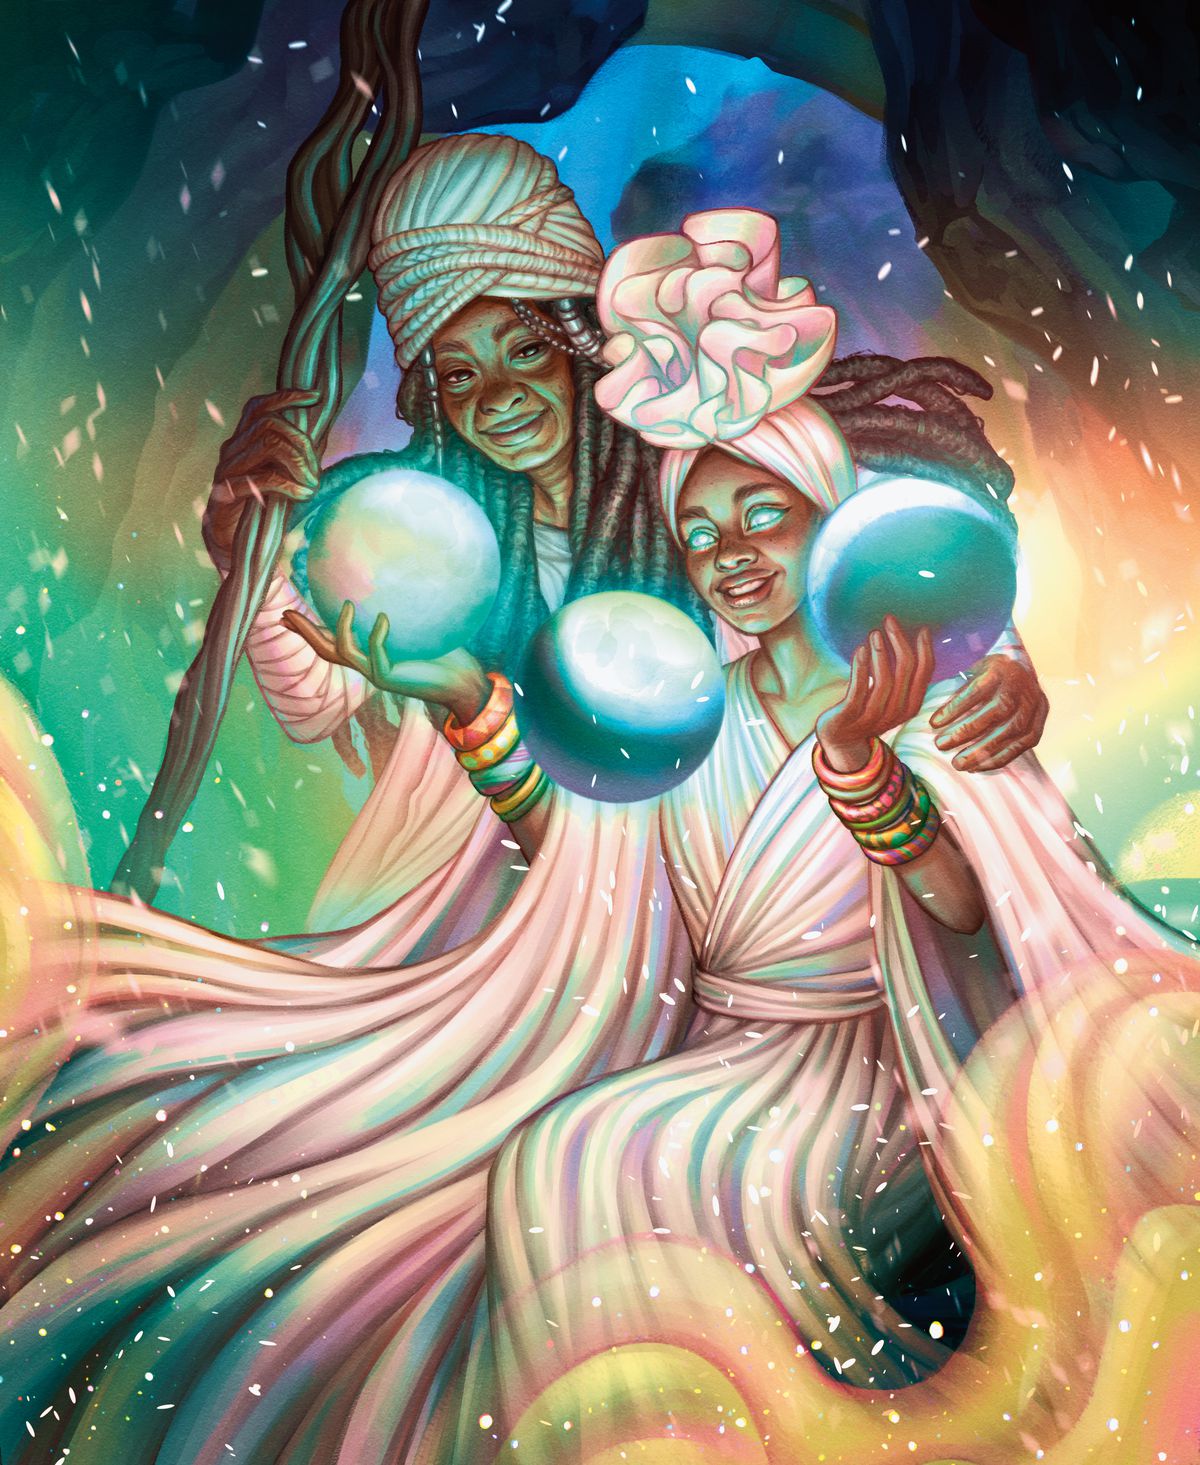 Two Black women in elaborate head wraps with floating orbs. Petals float around them.